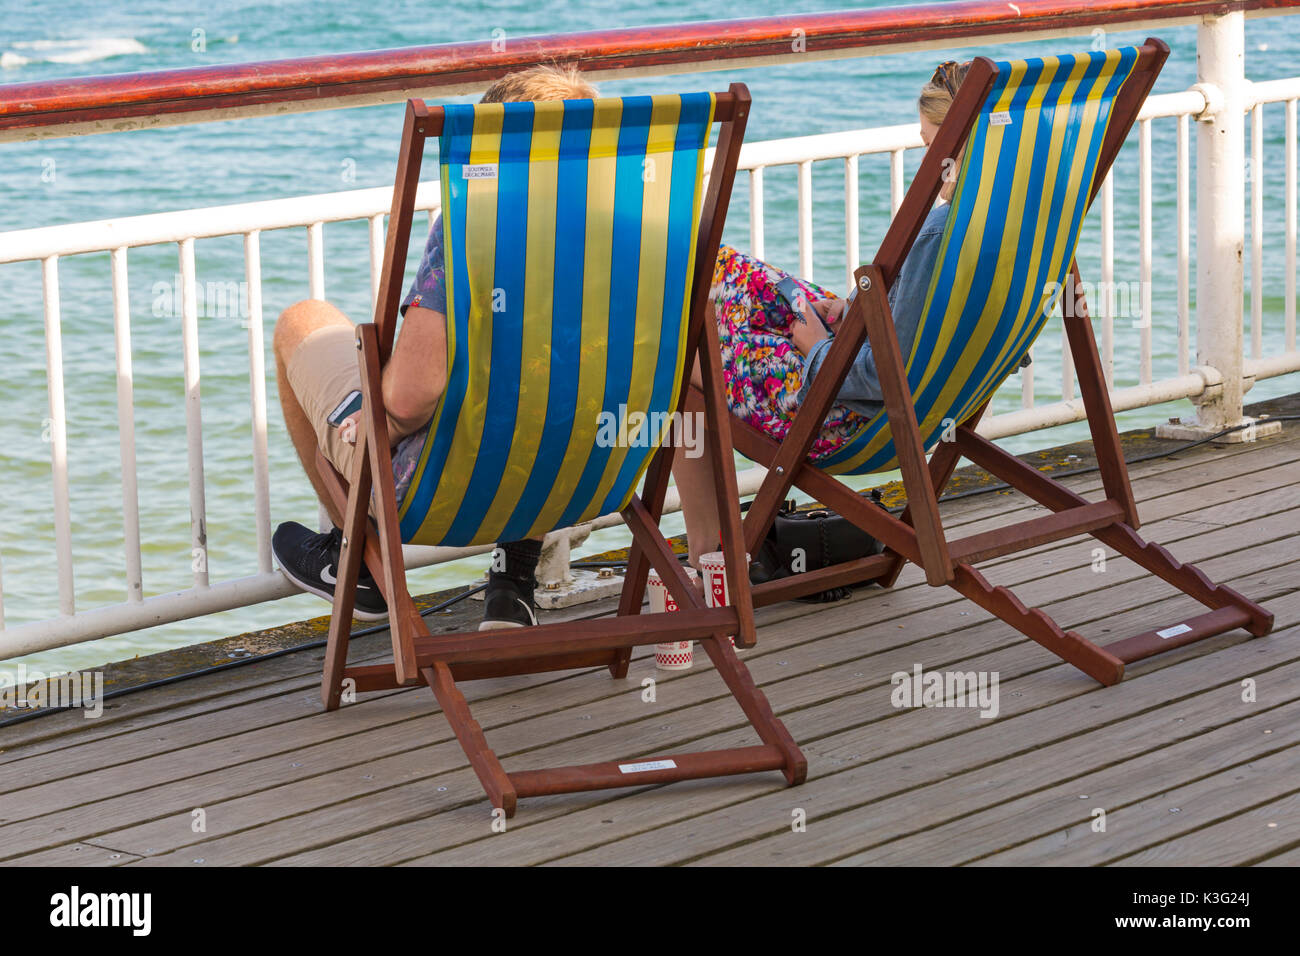 Bournemouth, Dorset, UK. 2nd Sept, 2017. UK weather: lovely warm sunny day at Bournemouth beach. Couple relaxing in deckchairs on Bournemouth Pier - back view, rear view. Credit: Carolyn Jenkins/Alamy Live News Stock Photo